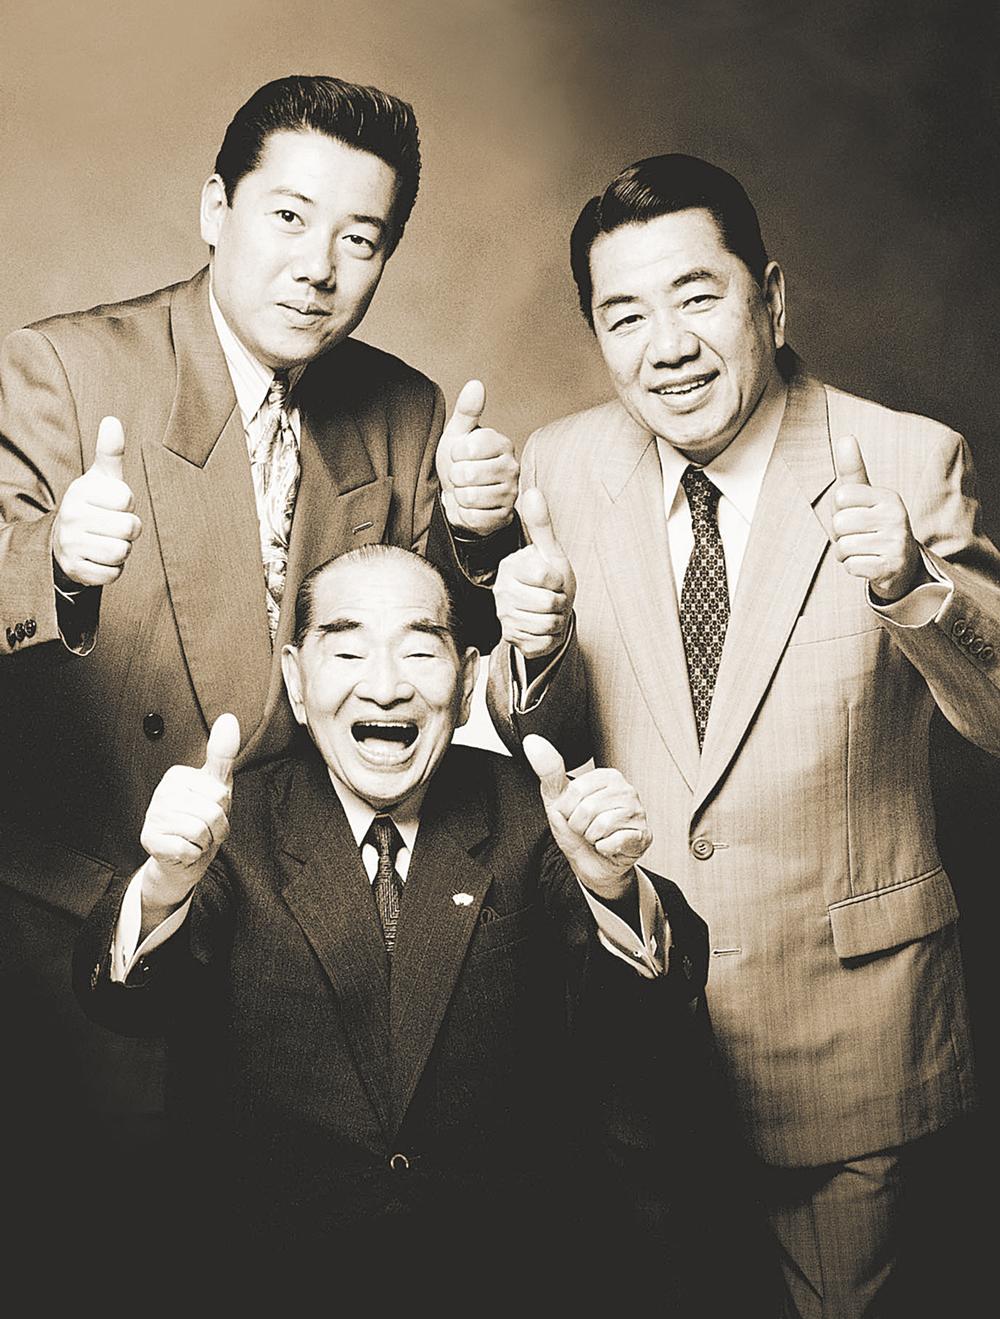 Family business: shiatsu founder Tokujiro Namikoshi (centre) with his son (right) and grandson (left)